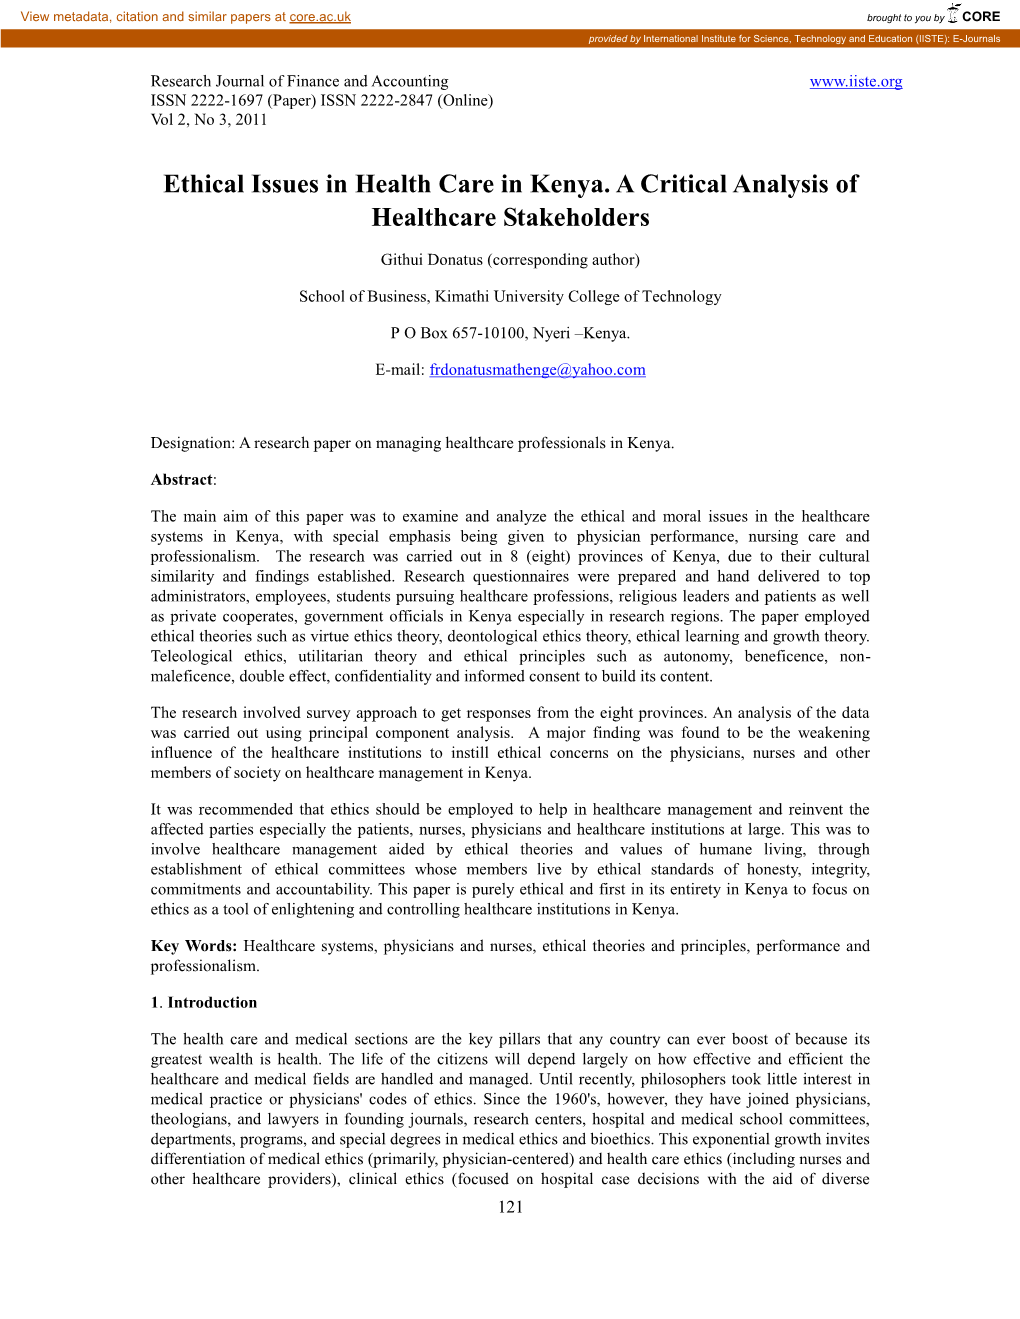 Ethical Issues in Health Care in Kenya. a Critical Analysis of Healthcare Stakeholders